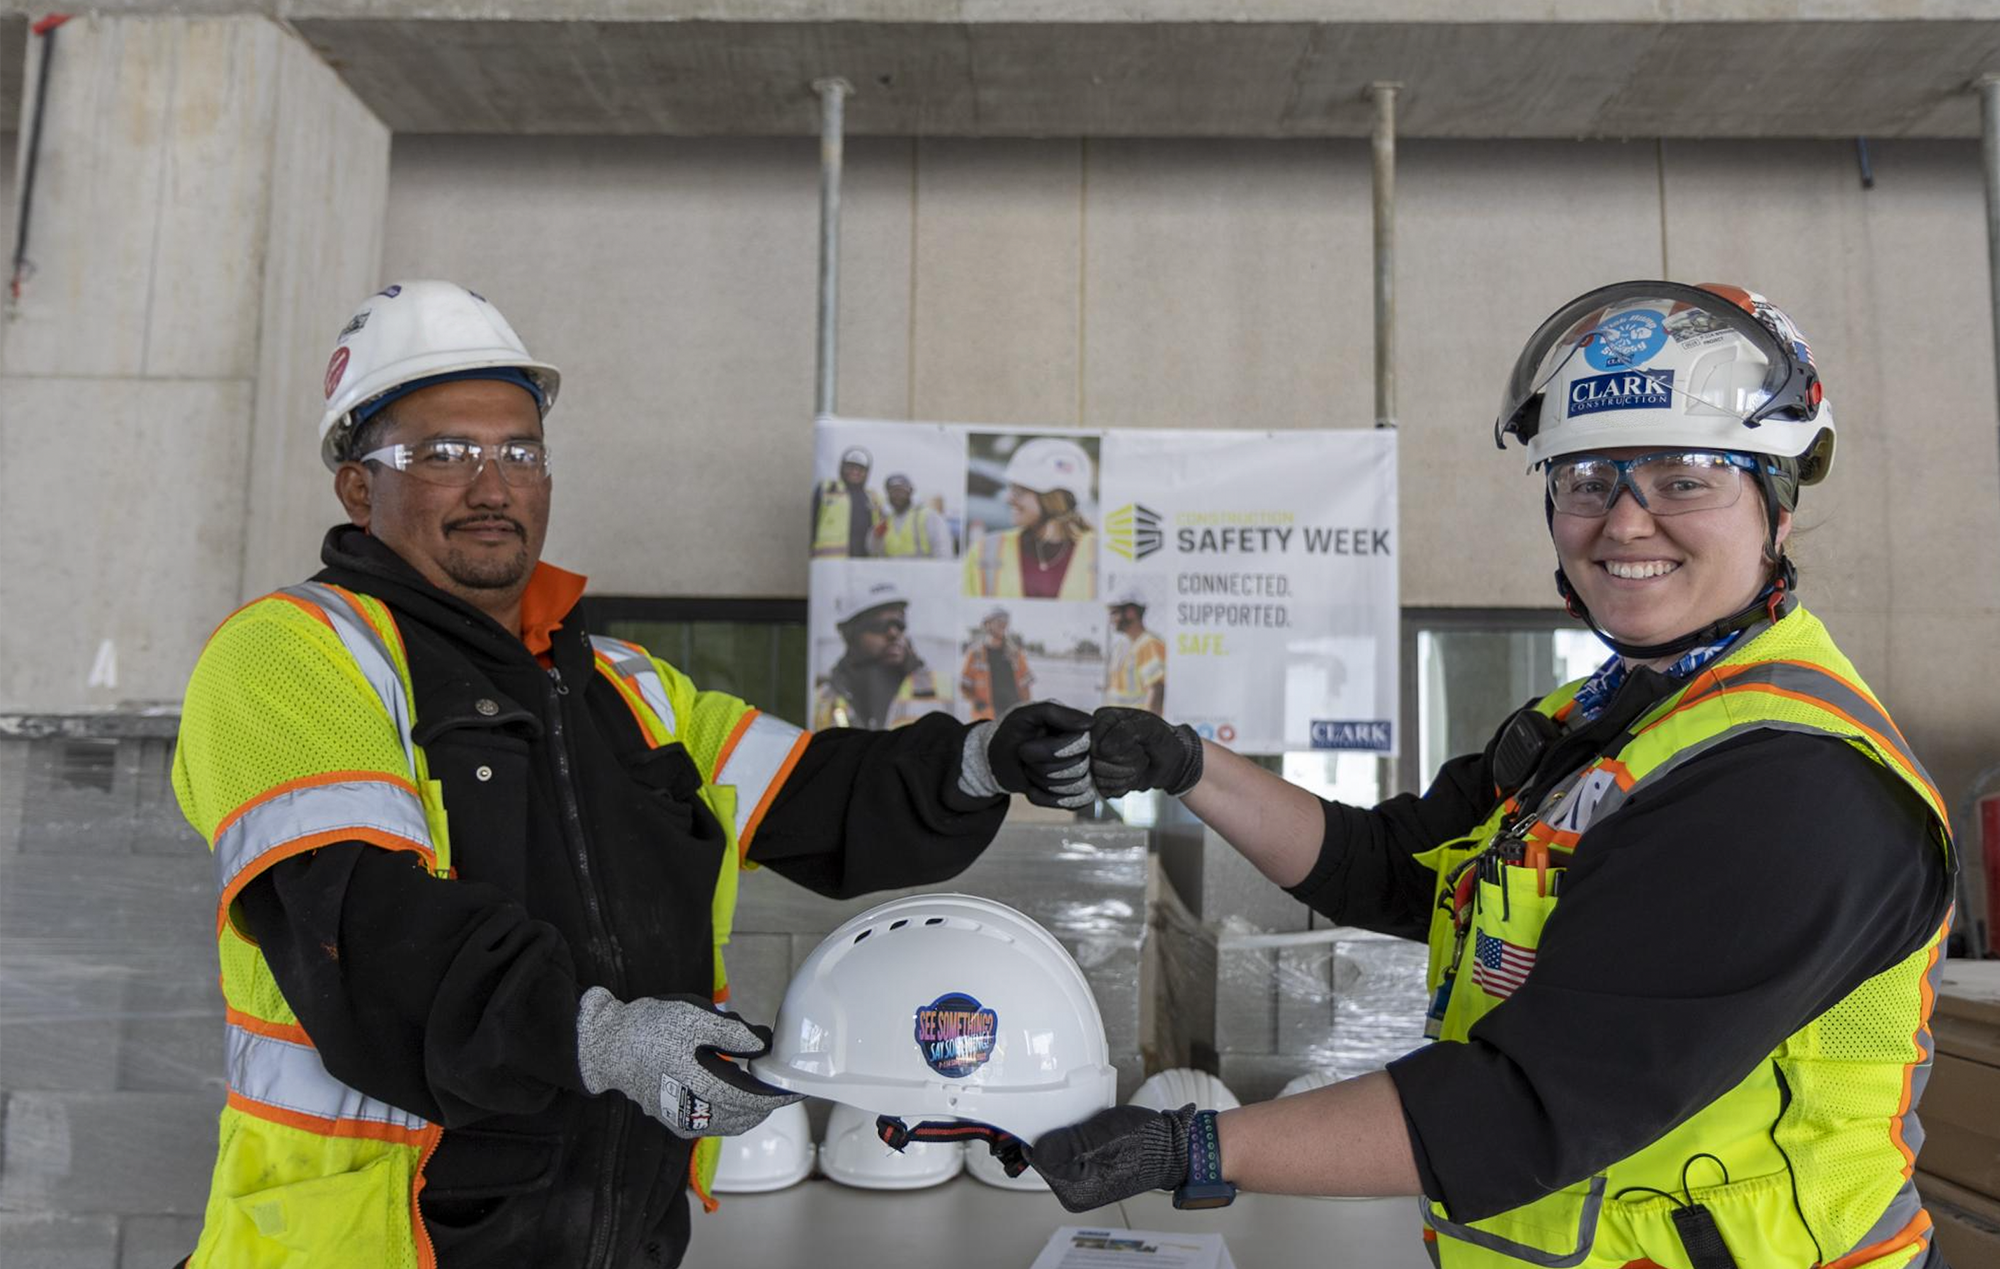 Trade contractor receives a safety helmet as part of Safety Week